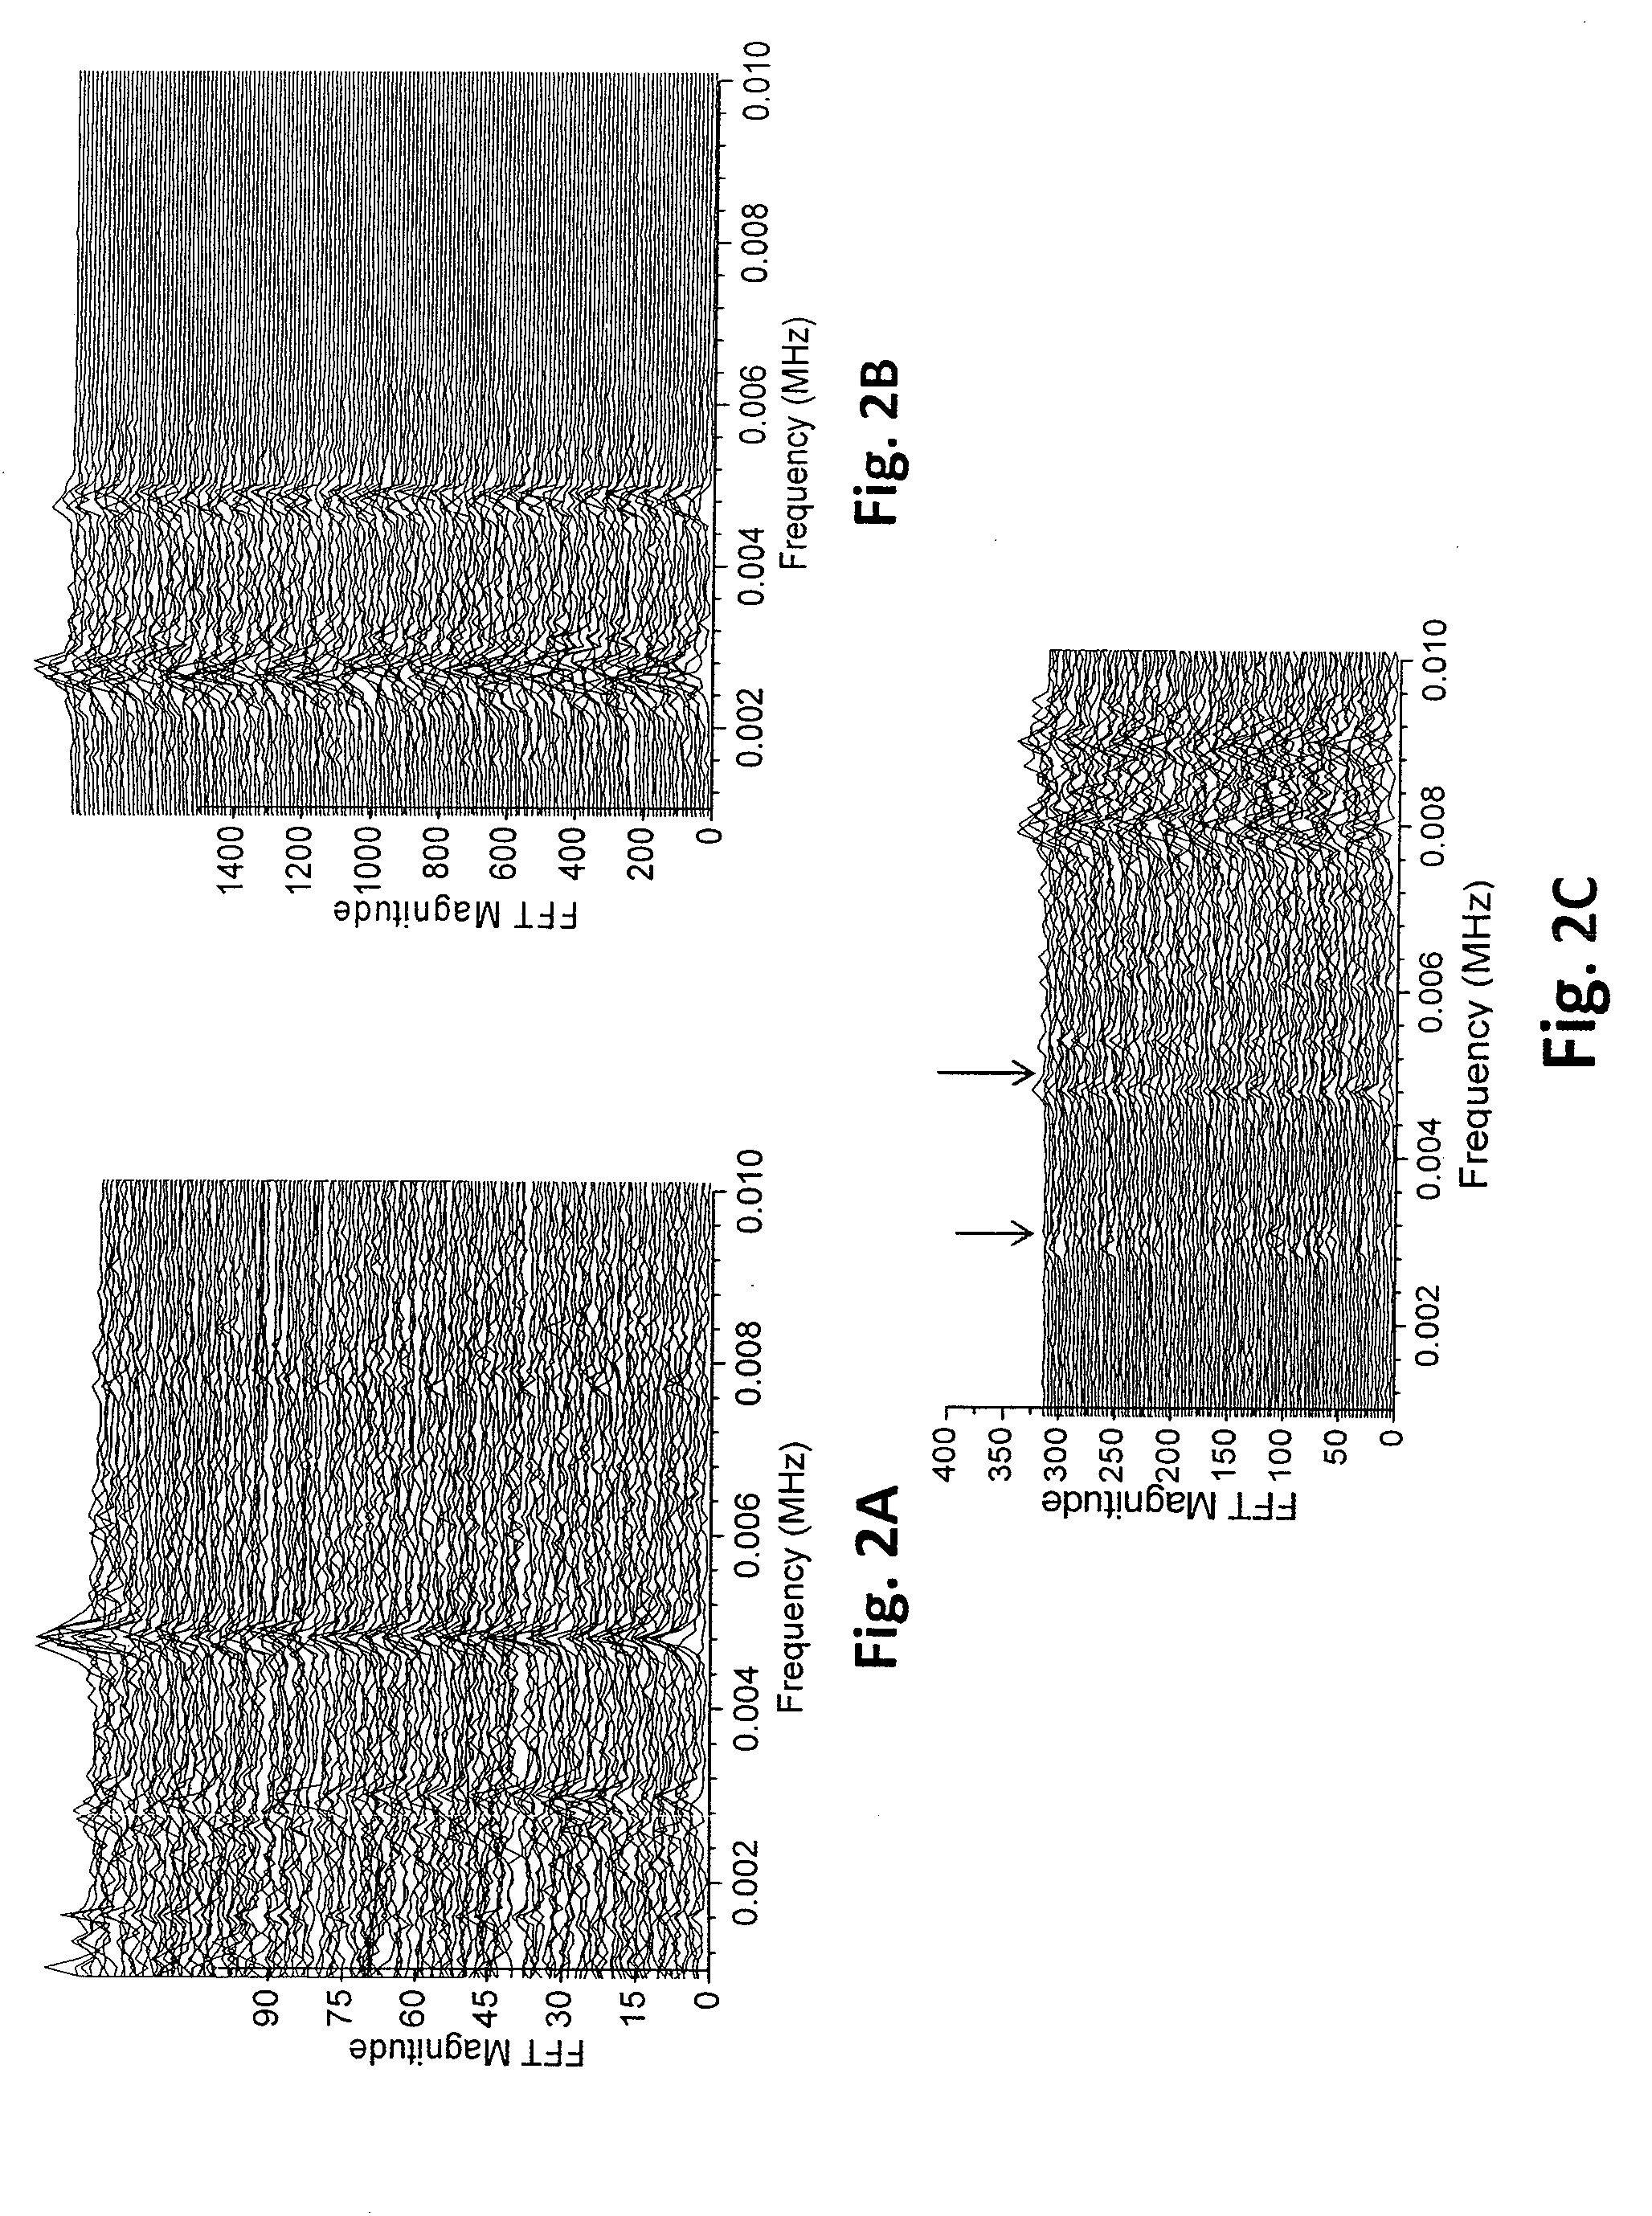 Apparatus and method for acoustic monitoring of steam quality and flow